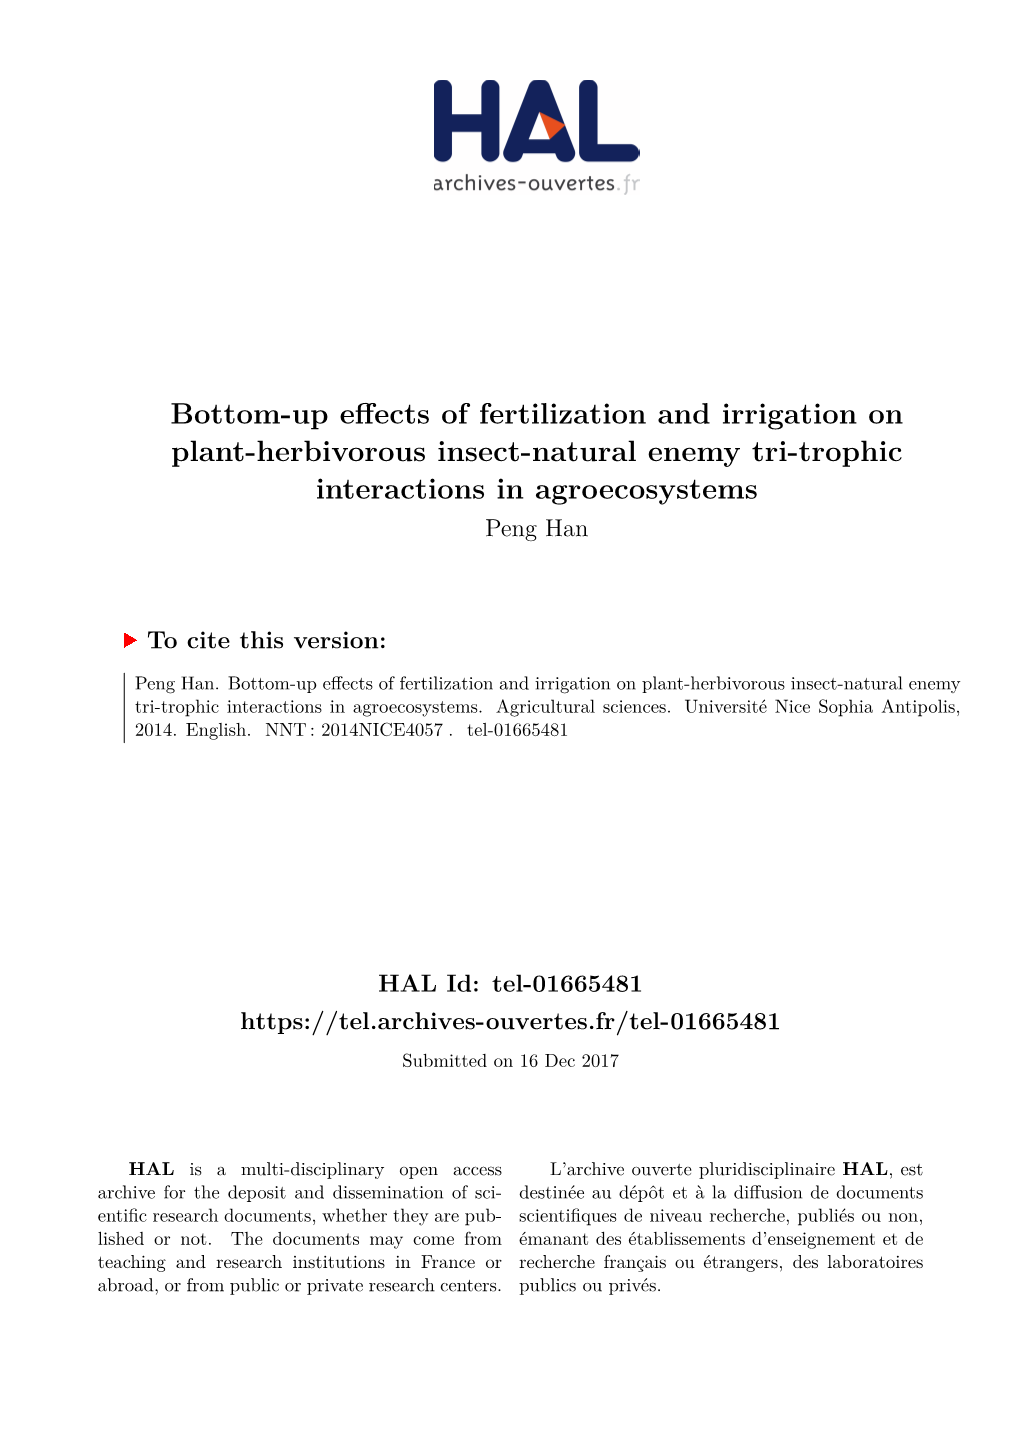 Bottom-Up Effects of Fertilization and Irrigation on Plant-Herbivorous Insect-Natural Enemy Tri-Trophic Interactions in Agroecosystems Peng Han